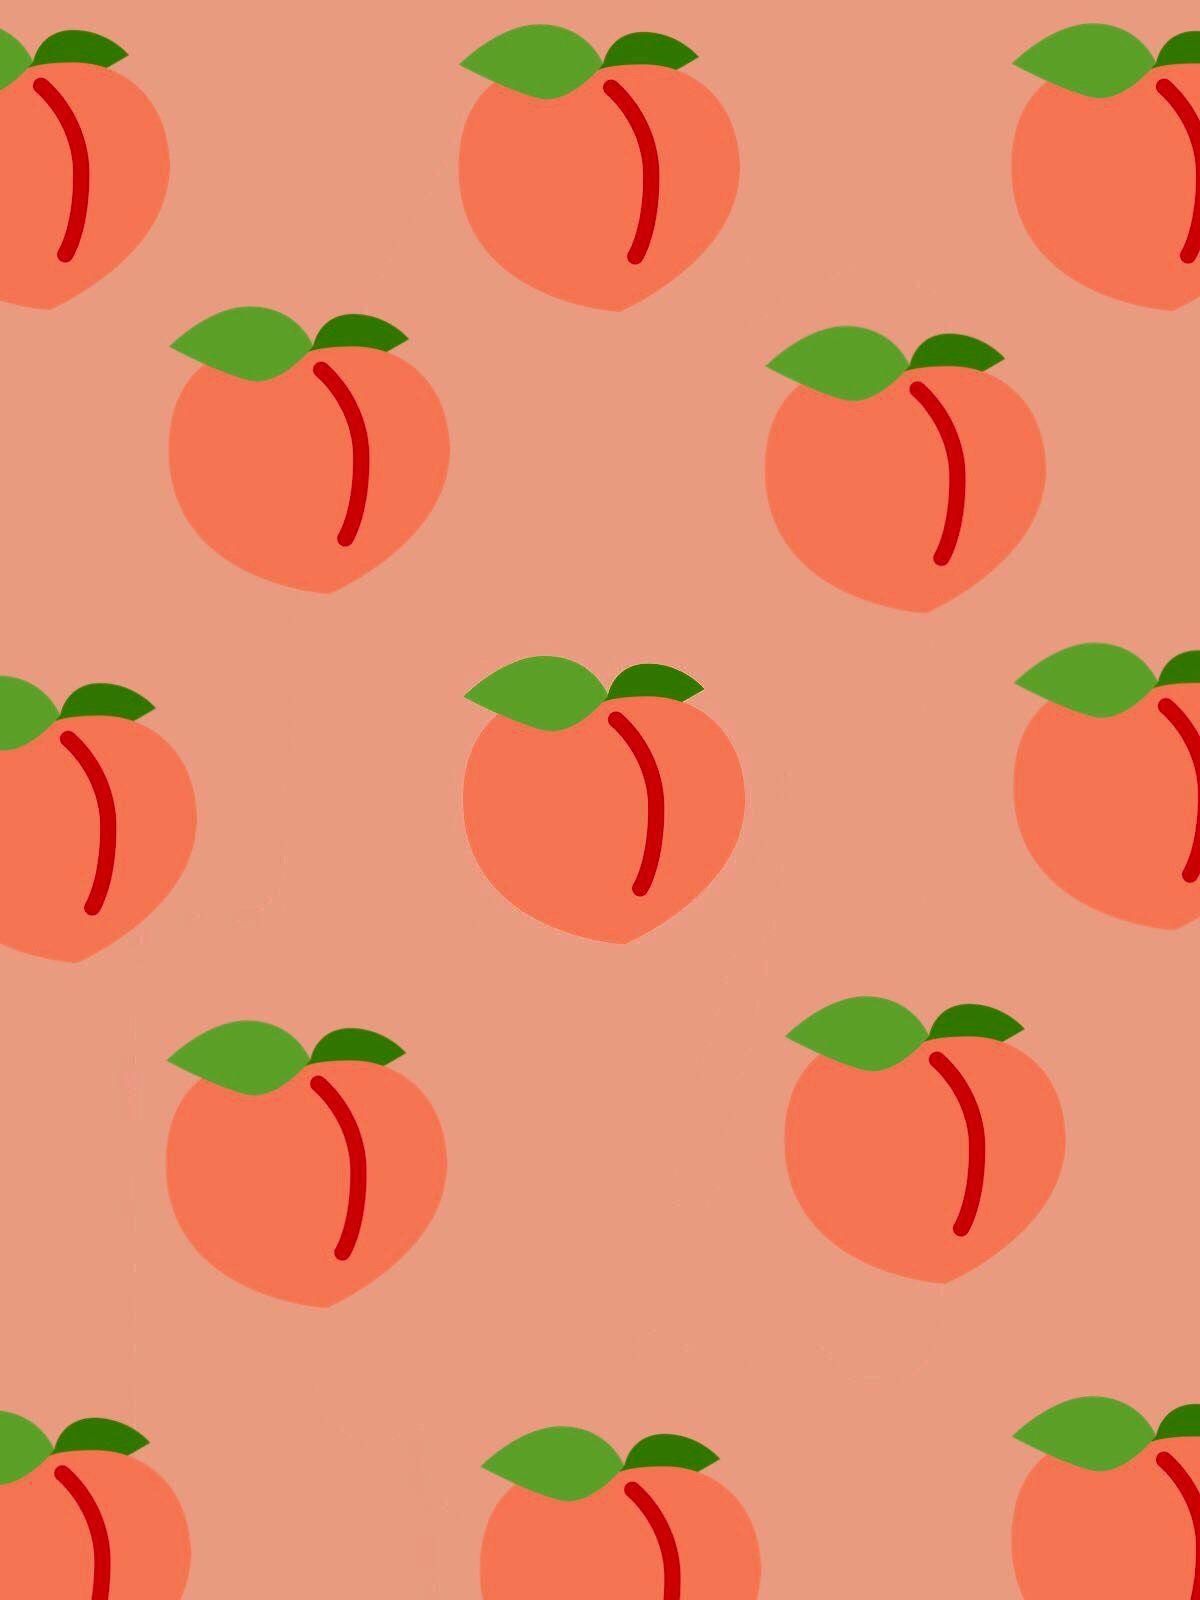 Peach background for phone, laptop, desktop, or any other device - Peach, fruit